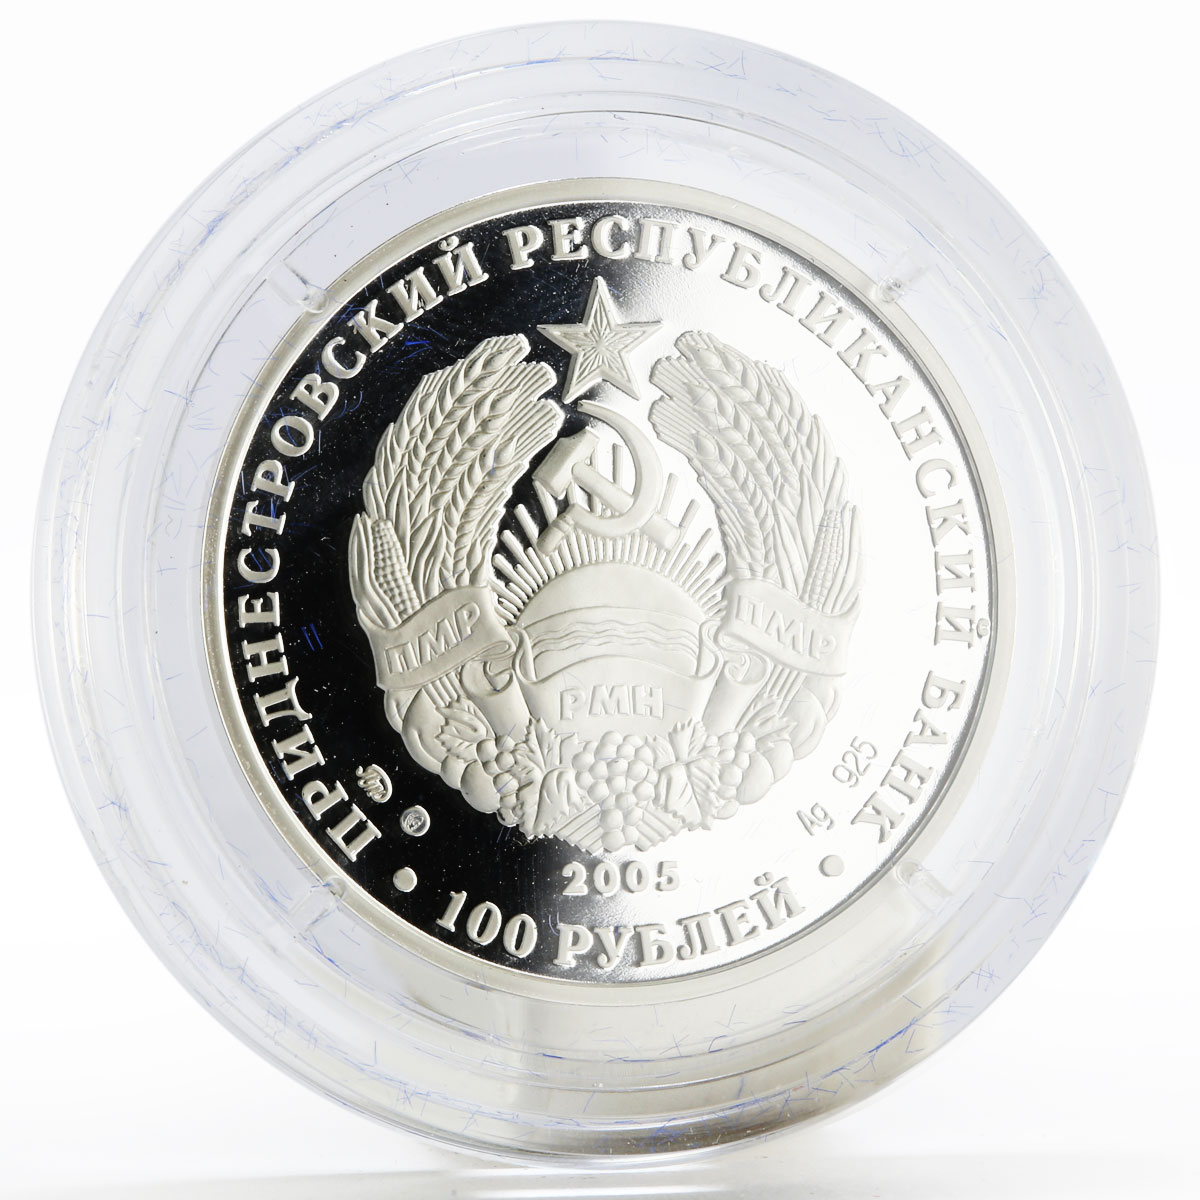 Transnistria 100 rubles 75 Years of Shevchenko State University silver coin 2005